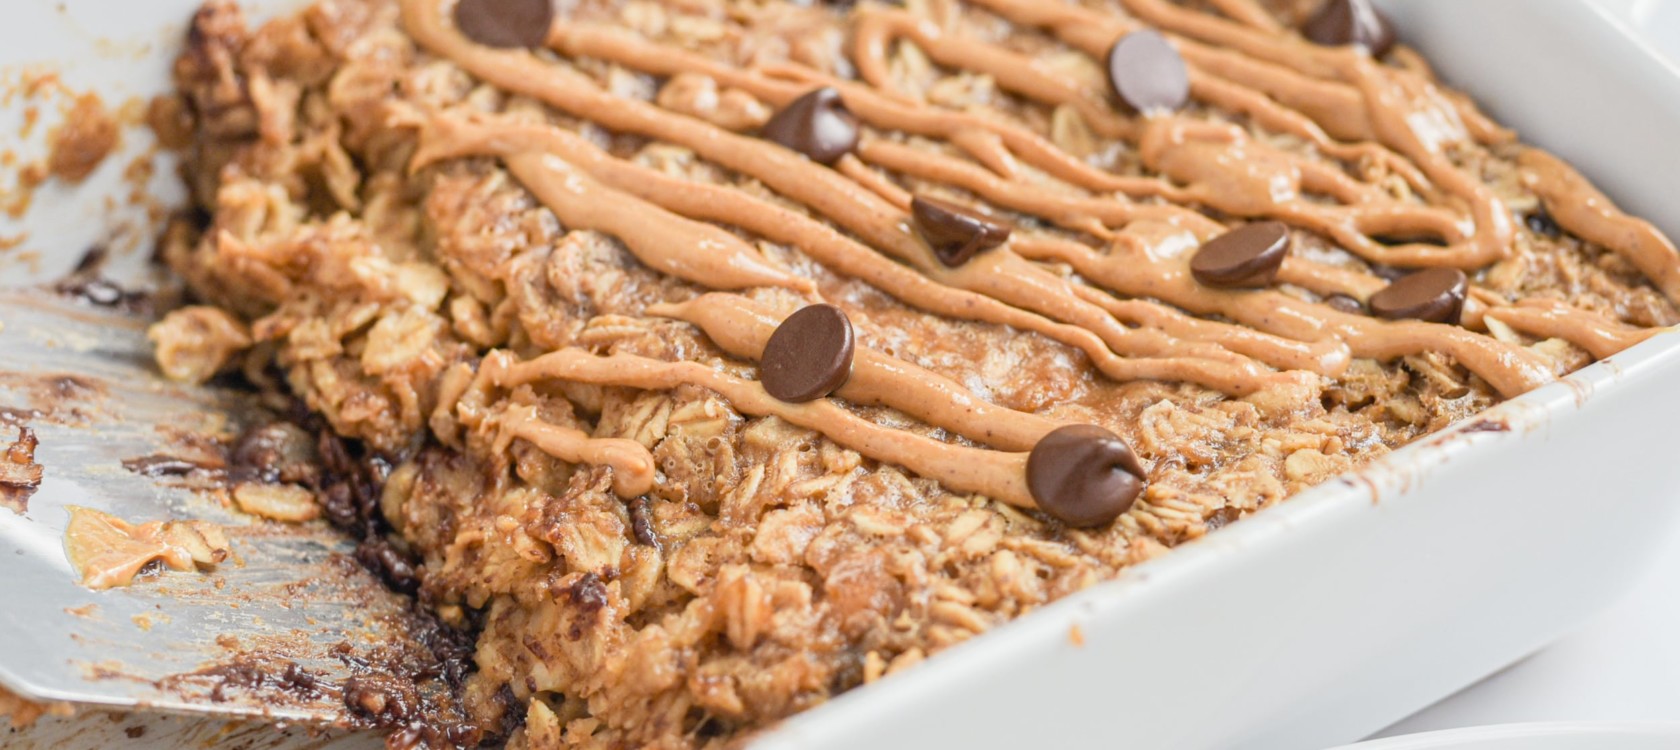 Vegan Snickers Baked Oatmeal